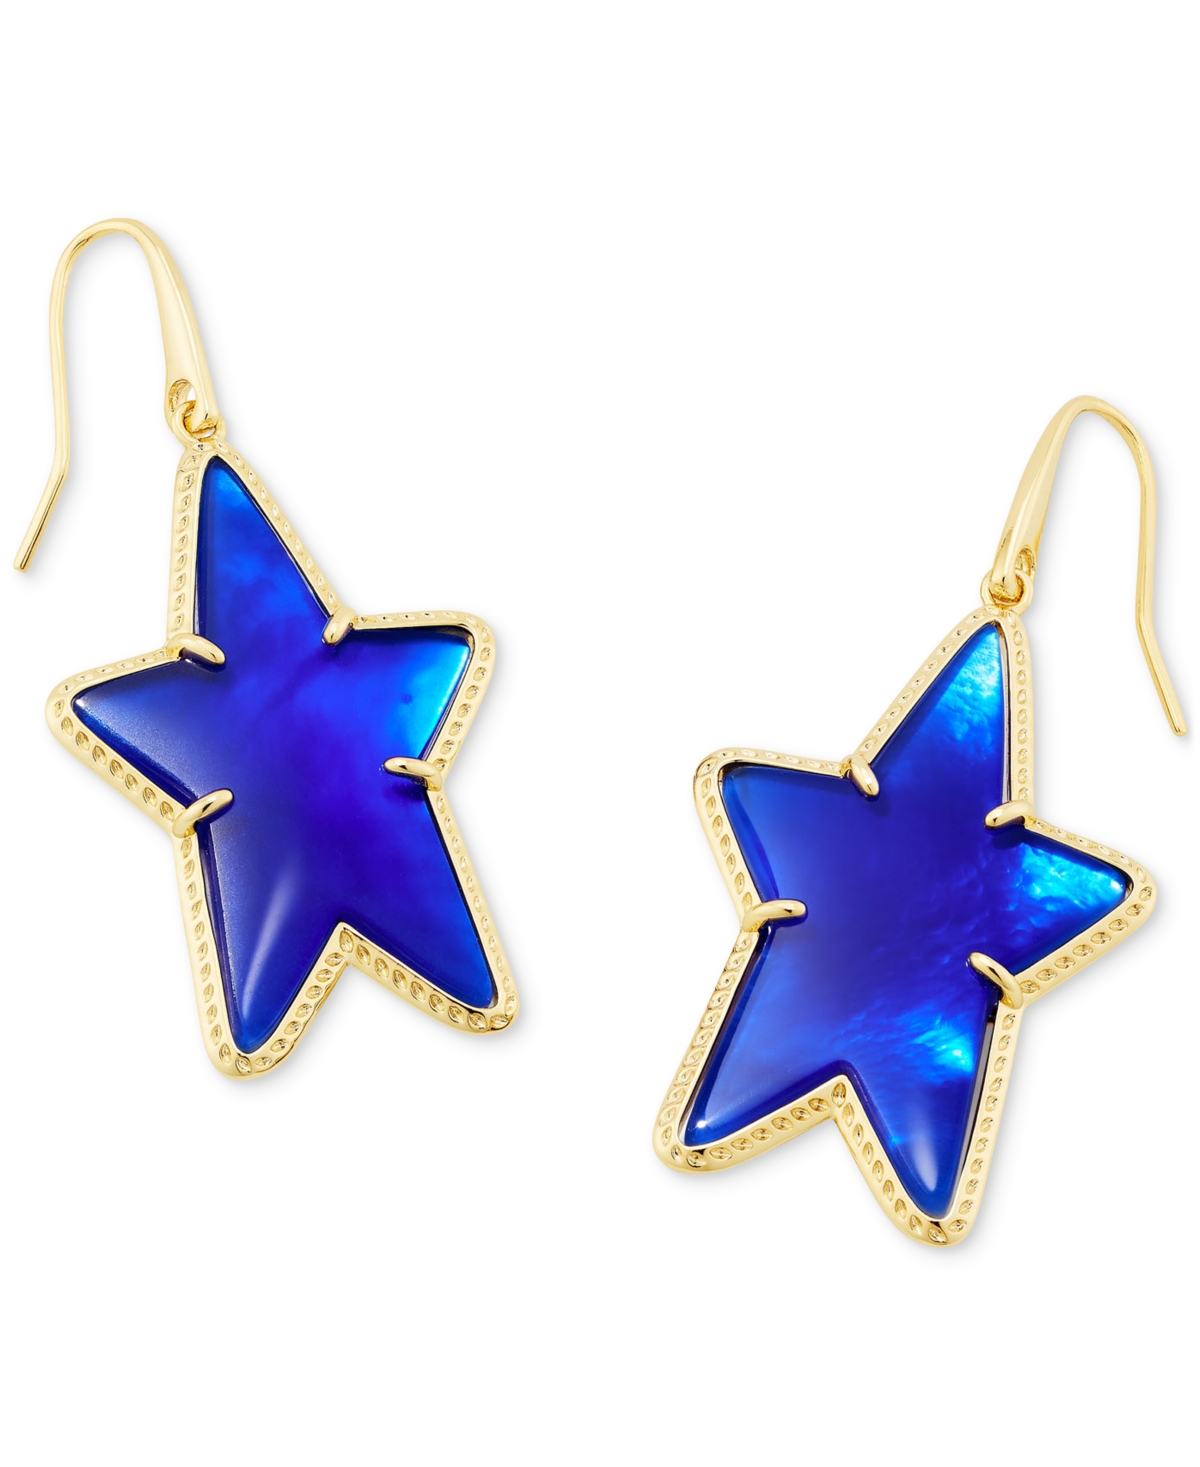 Kendra Scott 14k Gold-plated Color Mother-of-pearl Star Drop Earrings In Cobalt Blue Illusion